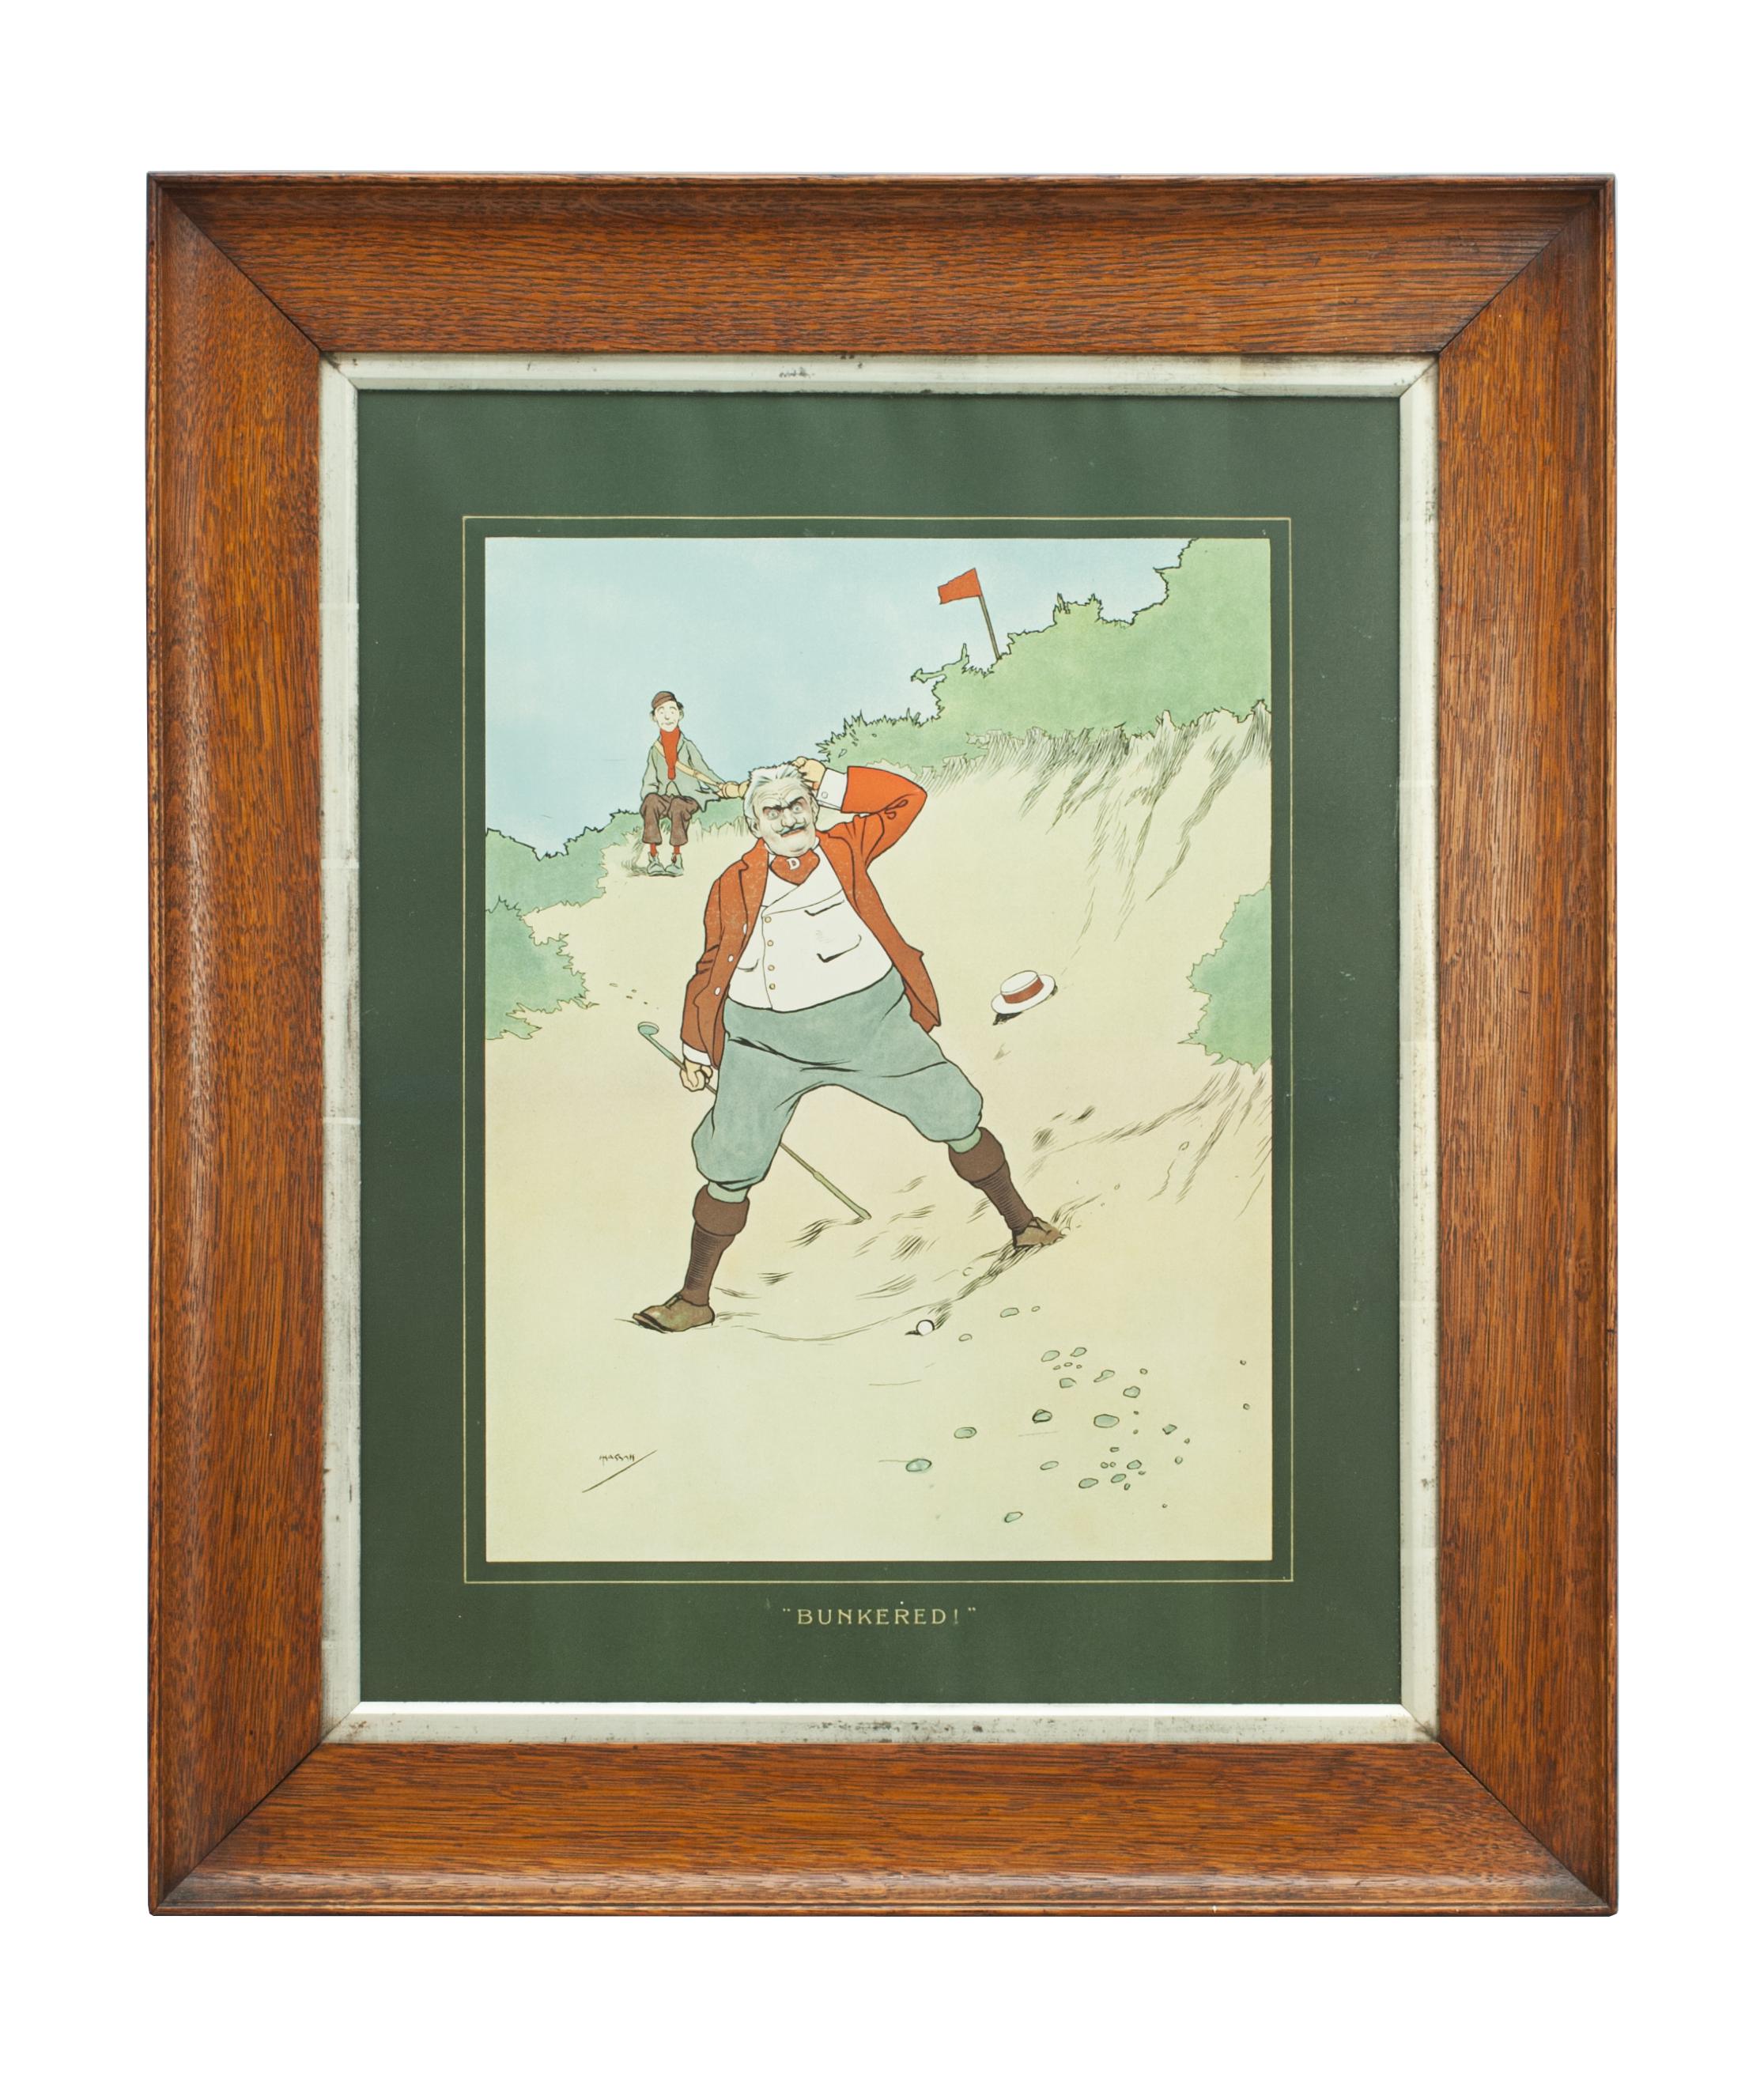 Pair of John Hassall golfing prints.
A very nice pair of golfing chromolithographs after J. Hassall entitled 'FORE!' and 'BUNKERED!'. The colorful golf prints are in the original oak frames. FORE! depicts a golfer in the sand with his young caddie,